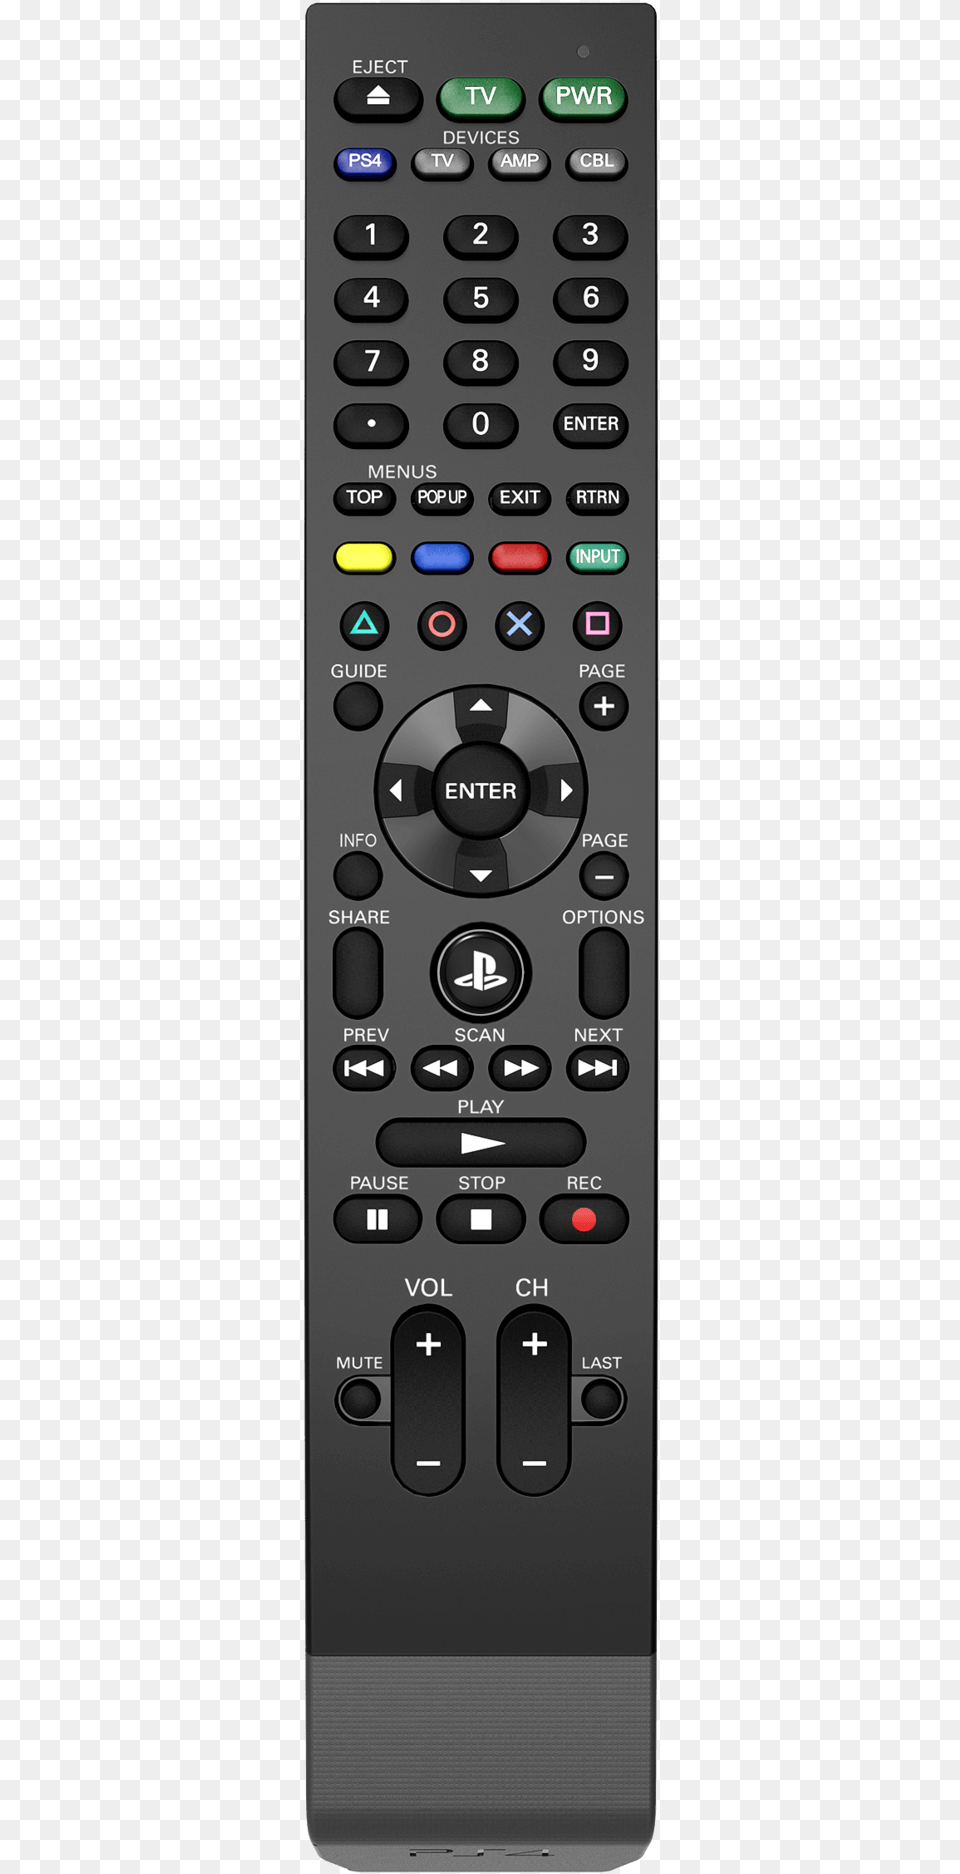 Media Remote For Playstation, Electronics, Remote Control Png Image